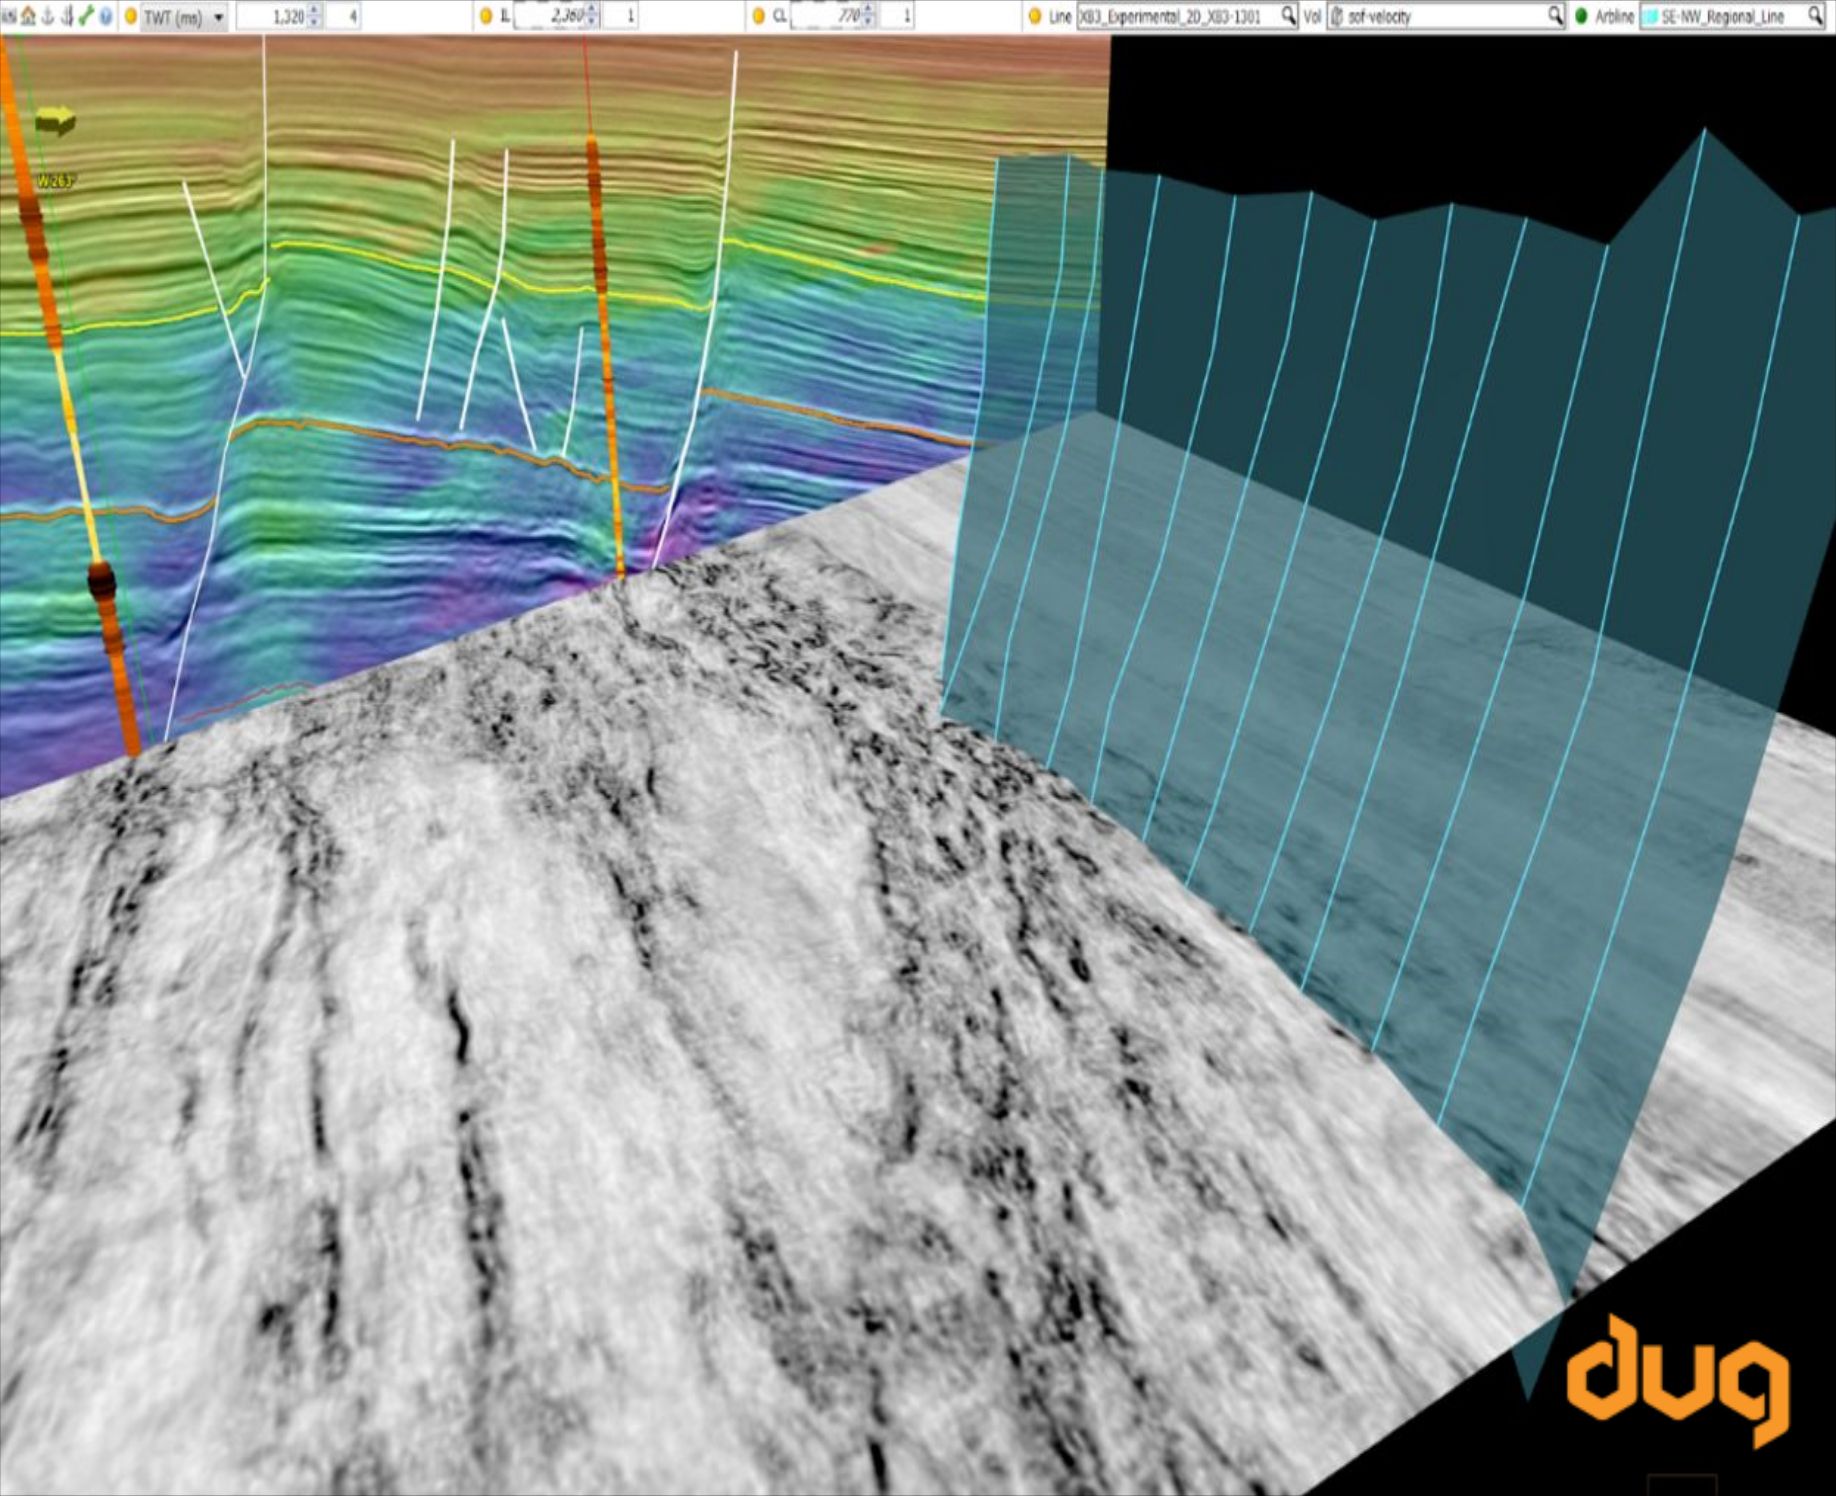 DUG Insight: Using the 3D View